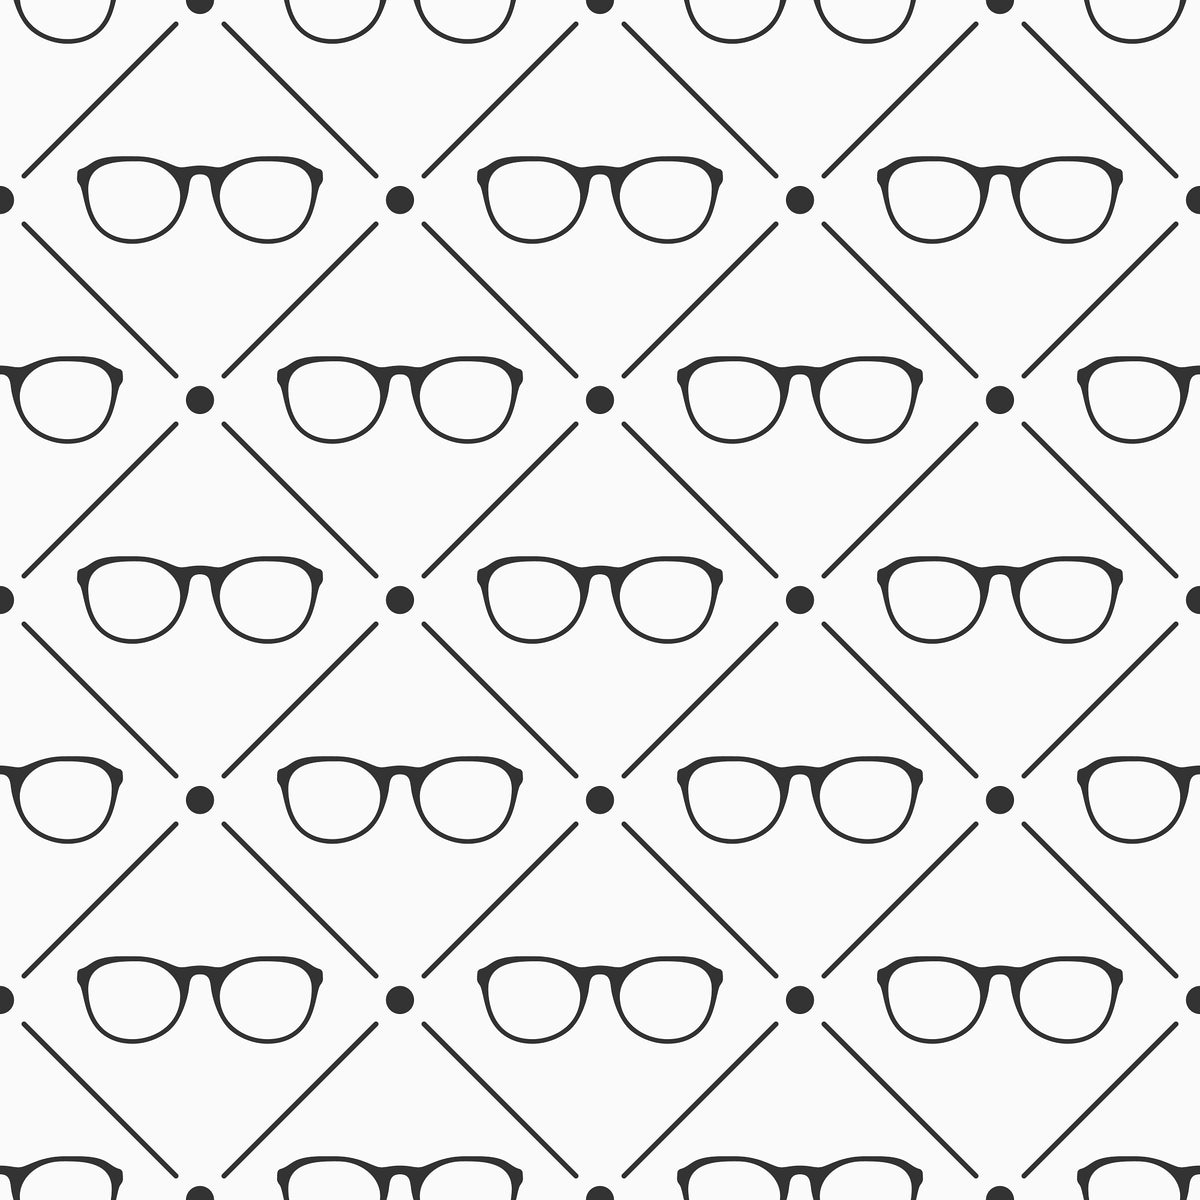 Spectacles - 808 Wall Art